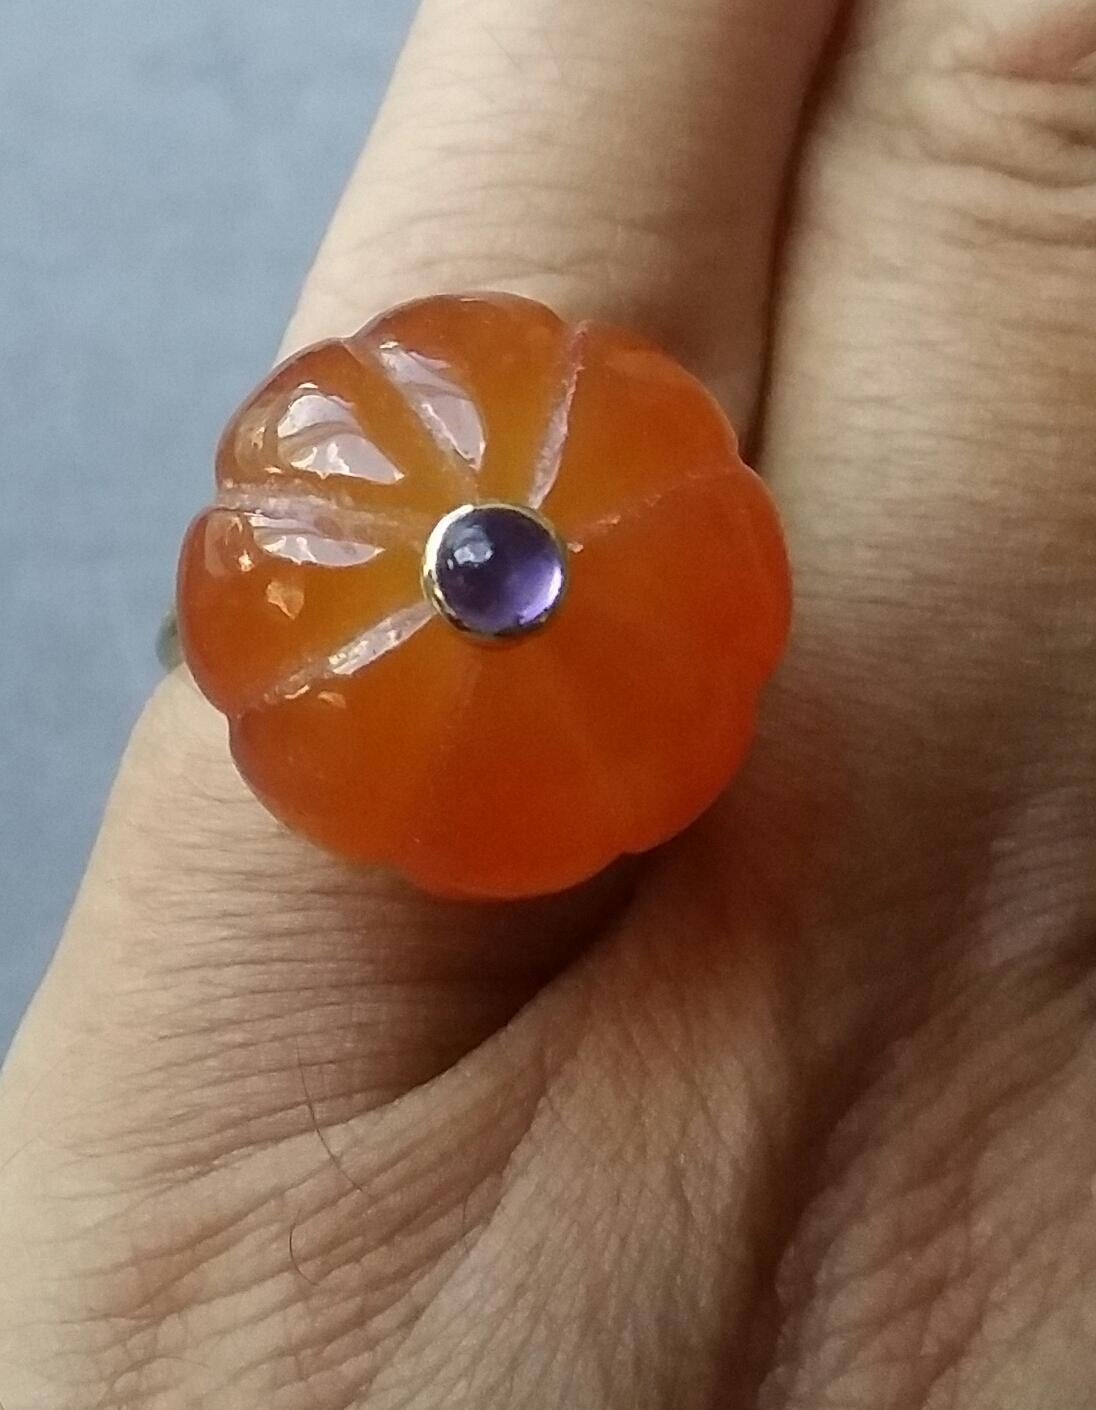 
Melon cut Carnelian Round Bead of 20 mm. in diameter and 16 mm. thick with in the center a round Amethyst cabochon of 4 mm. in diameter set in 14 kt yellow gold is mounted on top of a 14 Kt. yellow gold shank ( actual size #7, but can resize